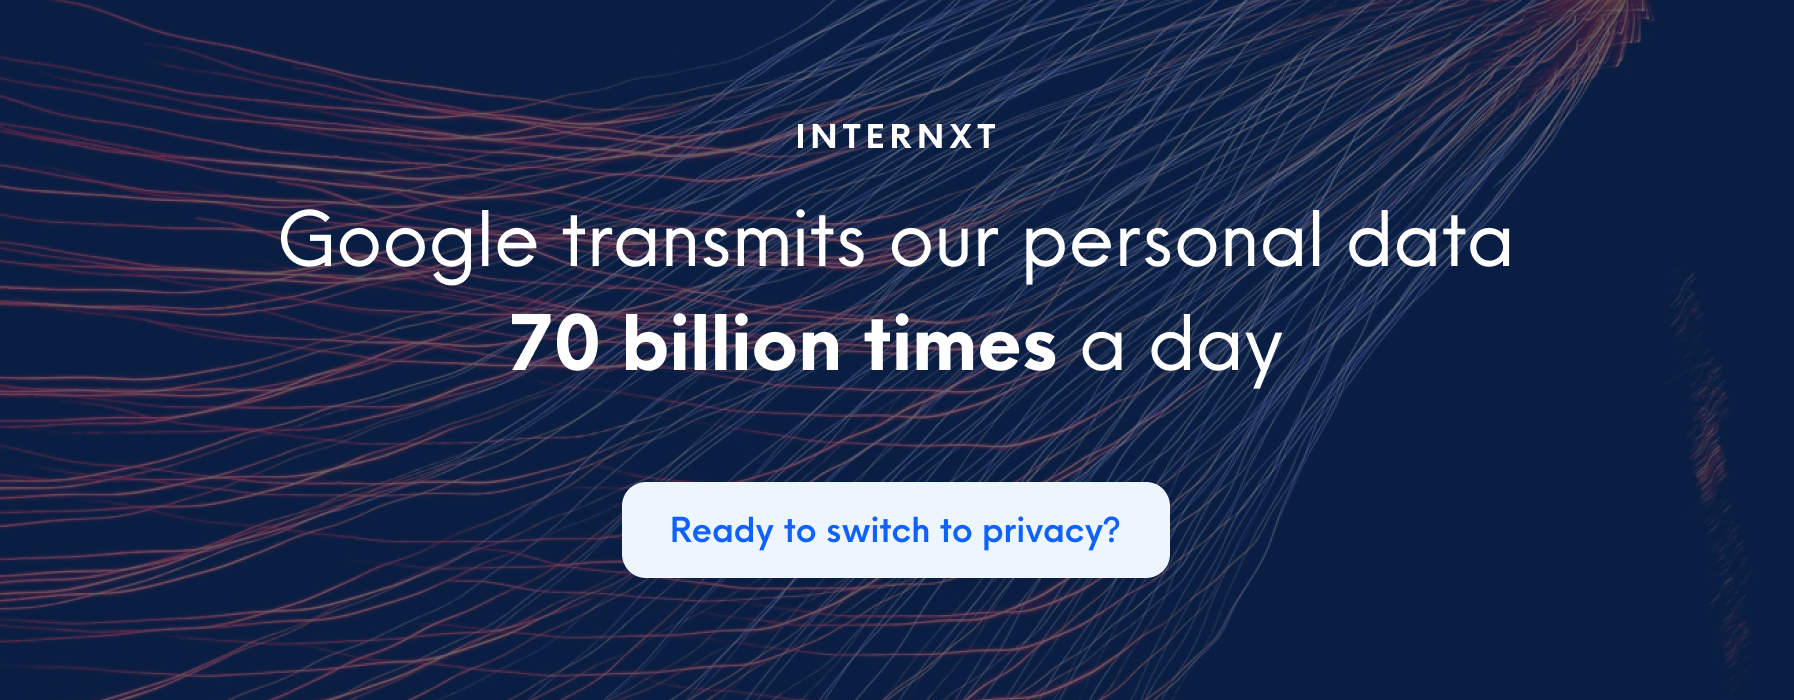 Internxt is a secure cloud storage based on privacy and encryption